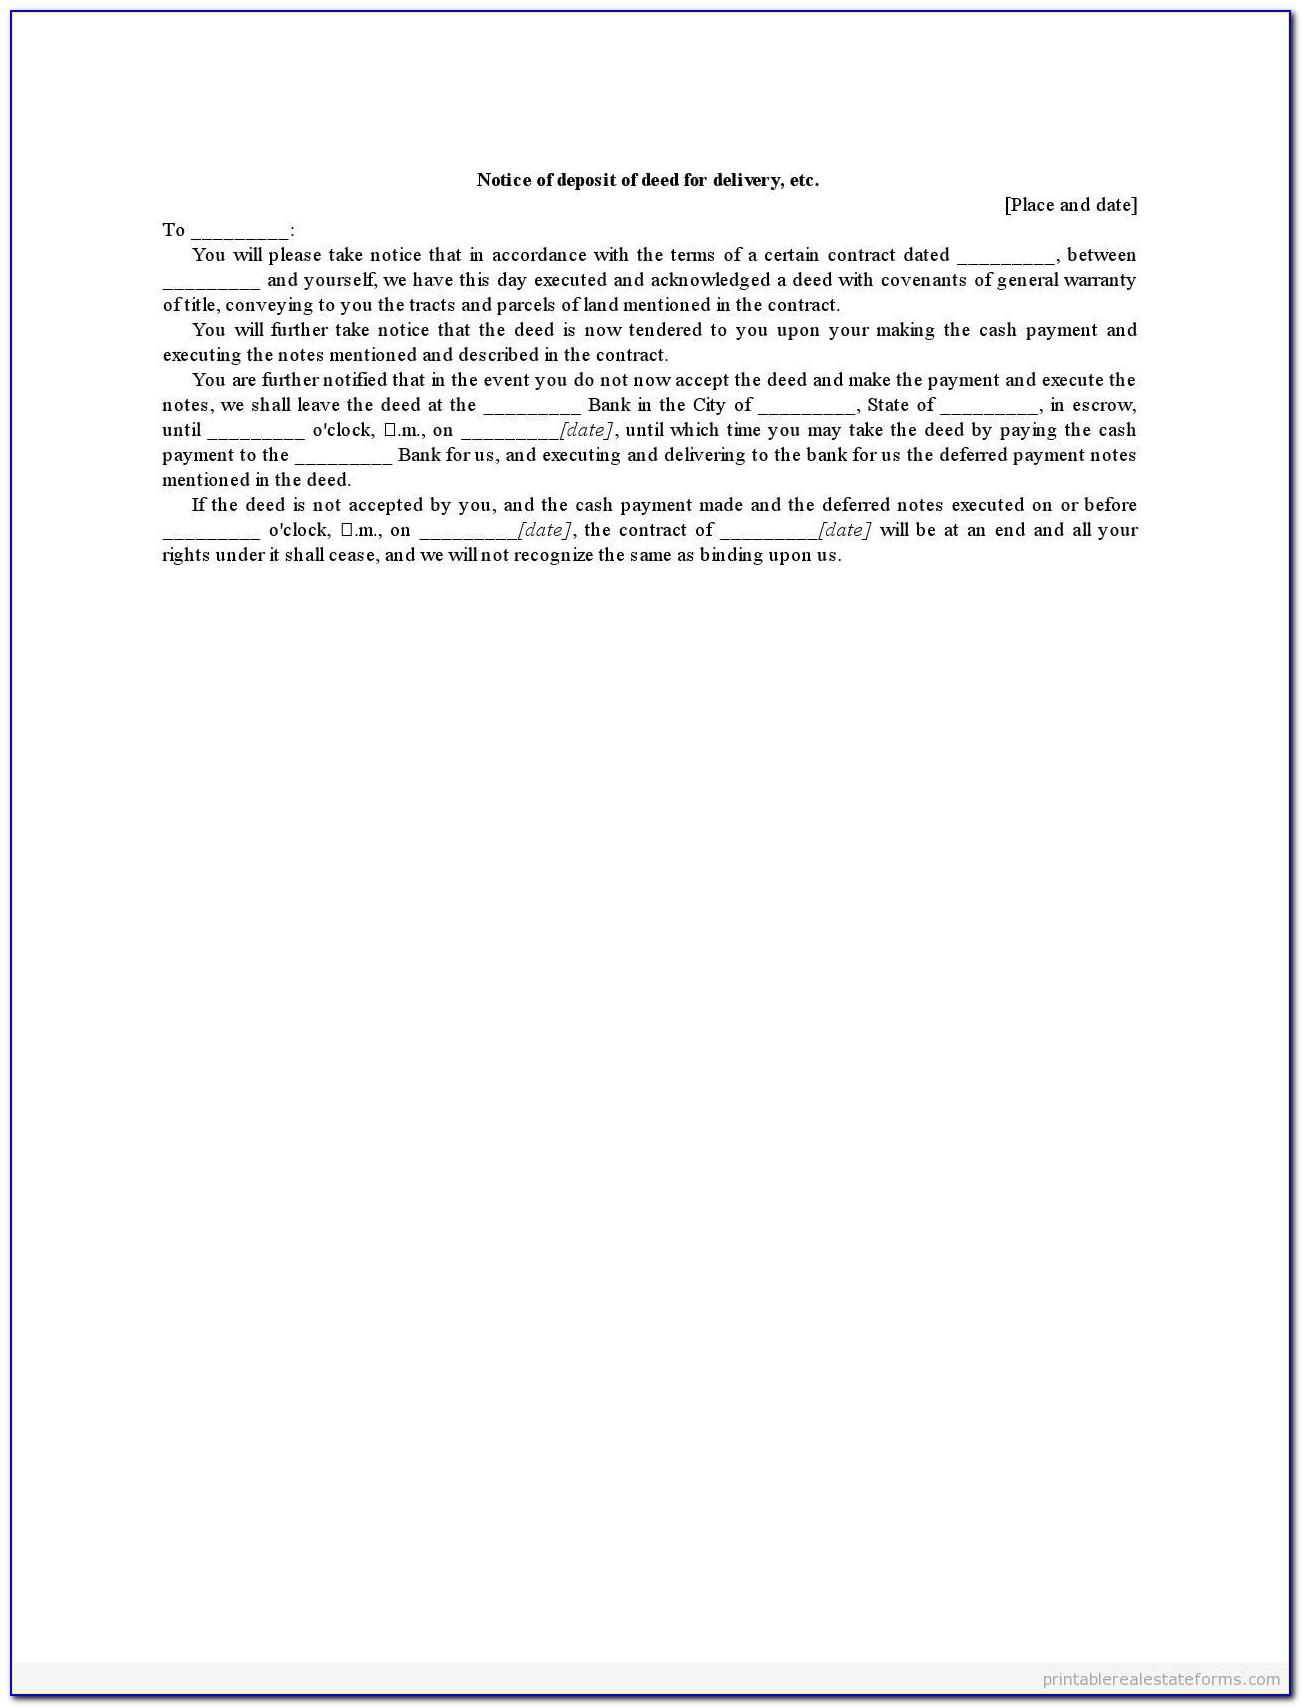 Promissory Note Security Agreement Template